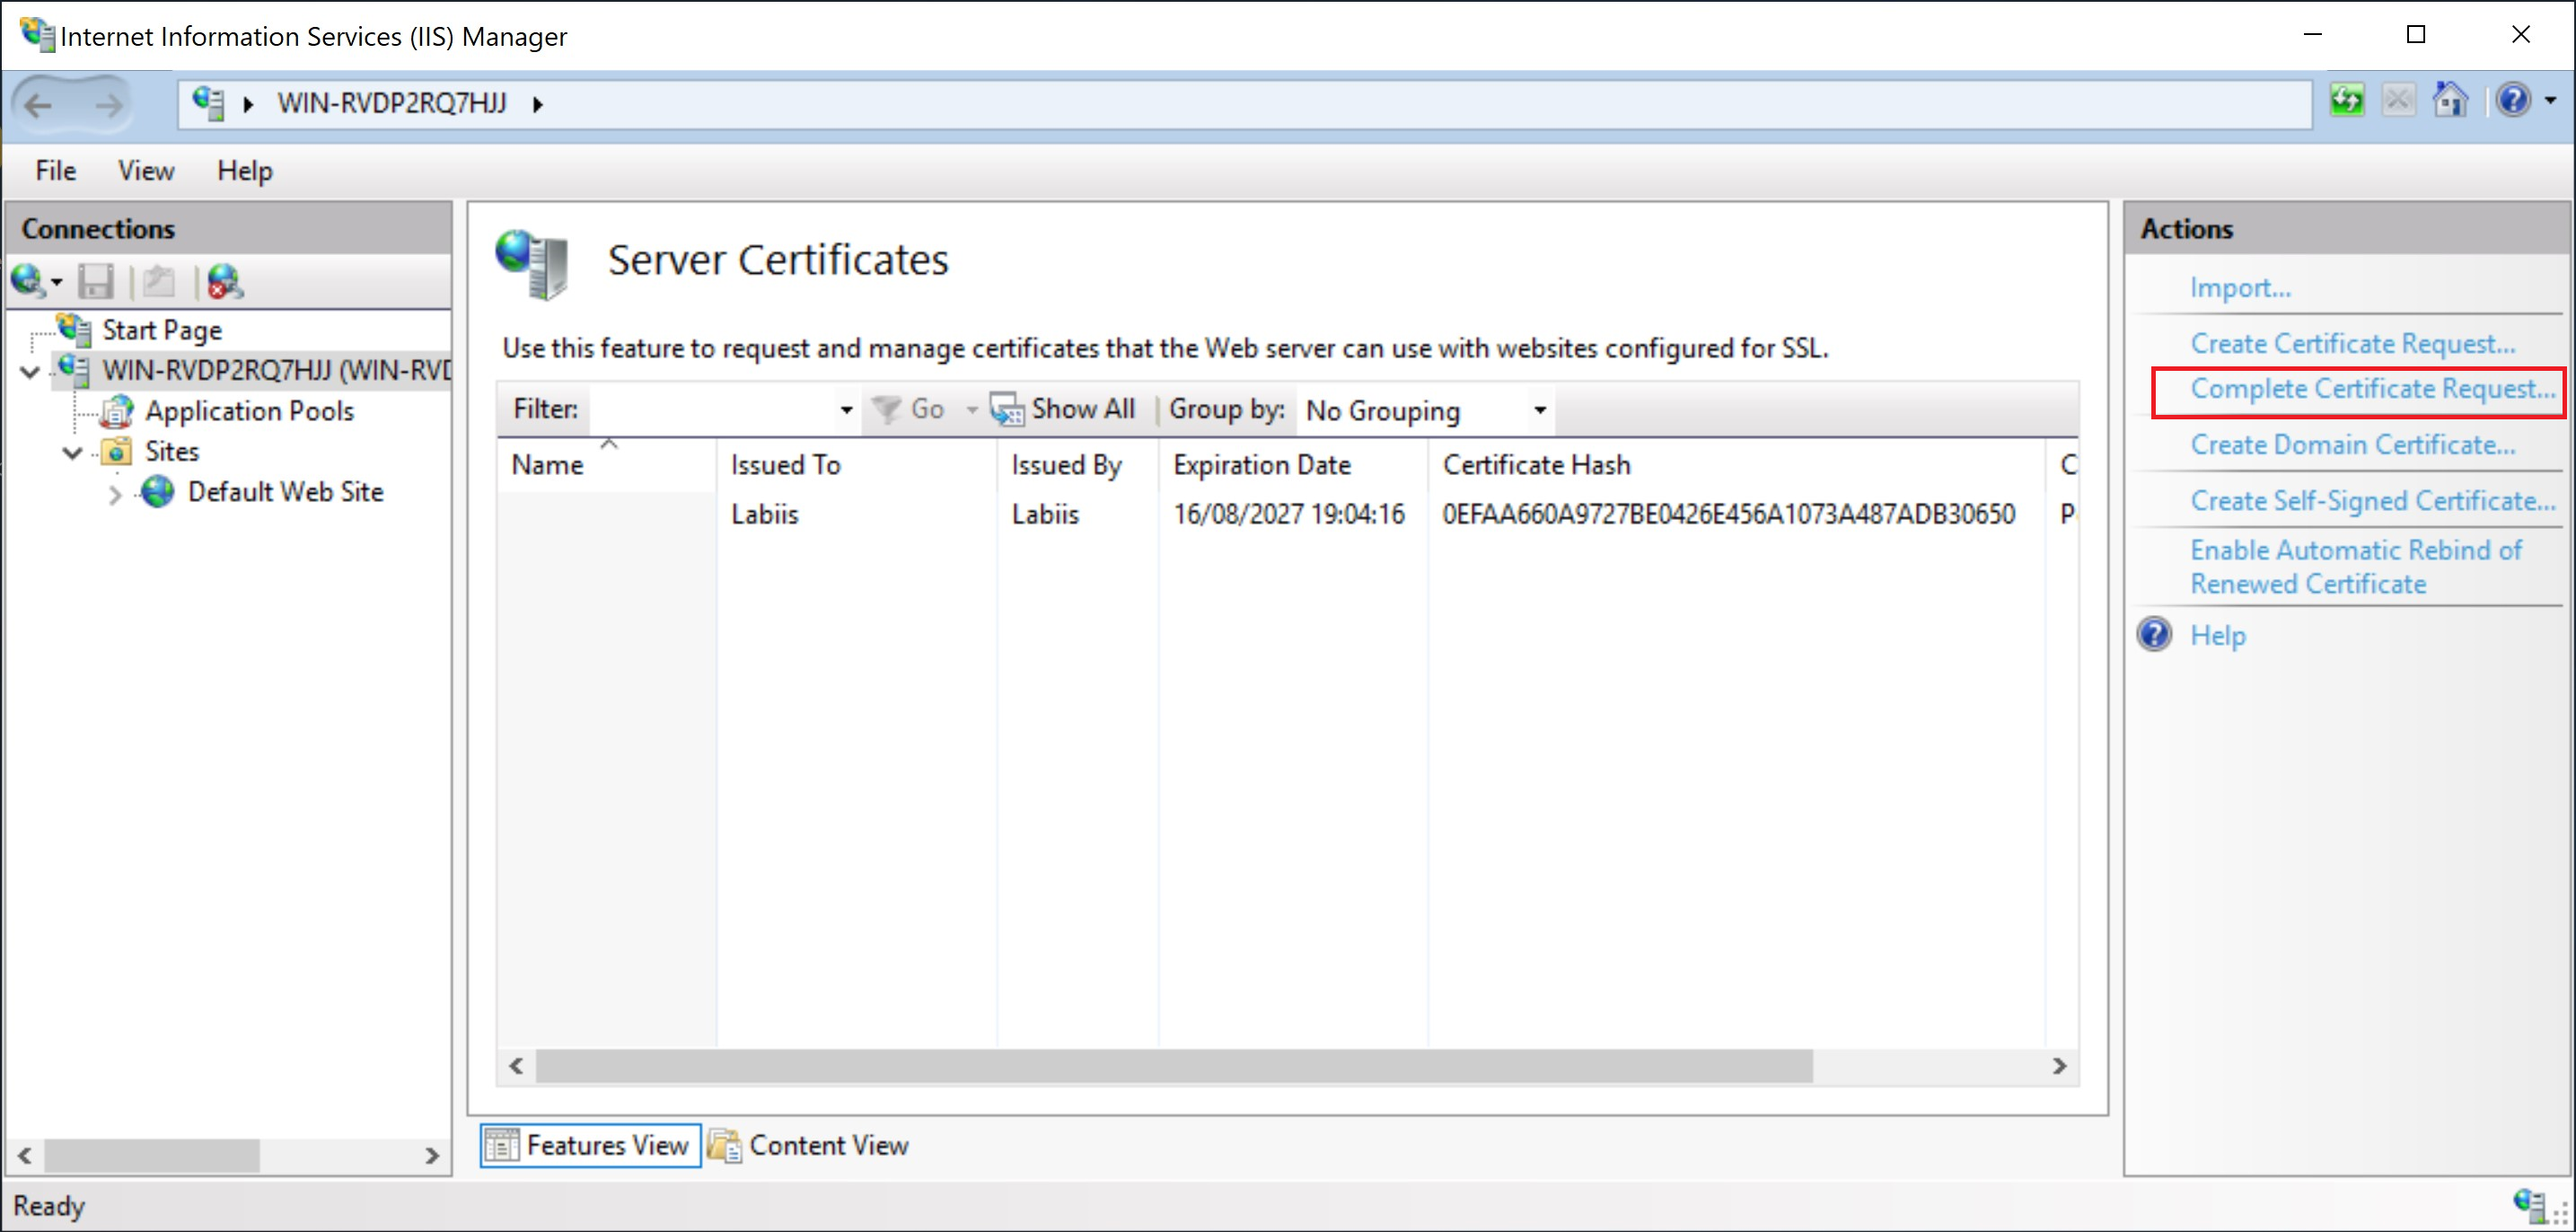 _IIS Manager_, complete the certificate request process